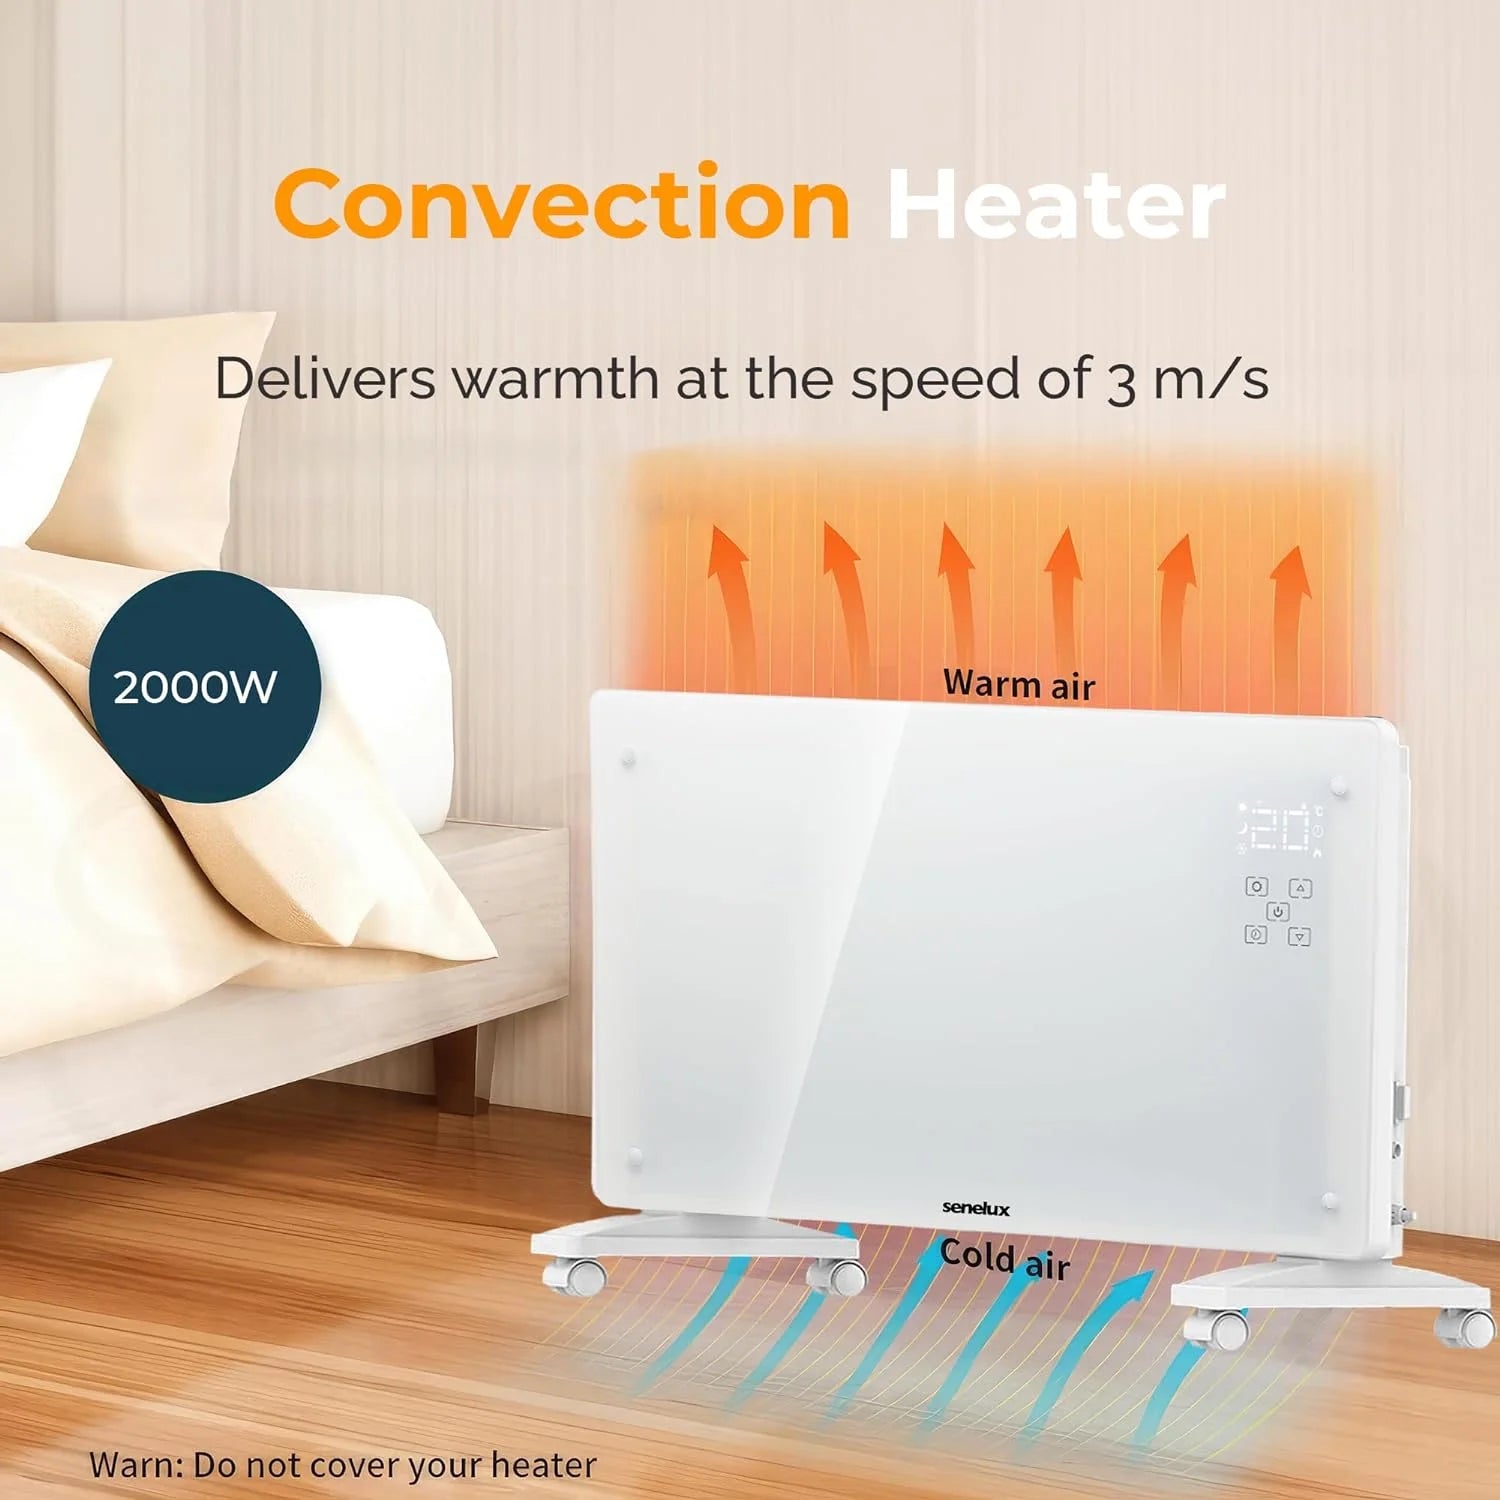 Glass Panel Heater with Wifi Controls | Wall Mounted or Free Standing with Wheels for your Home